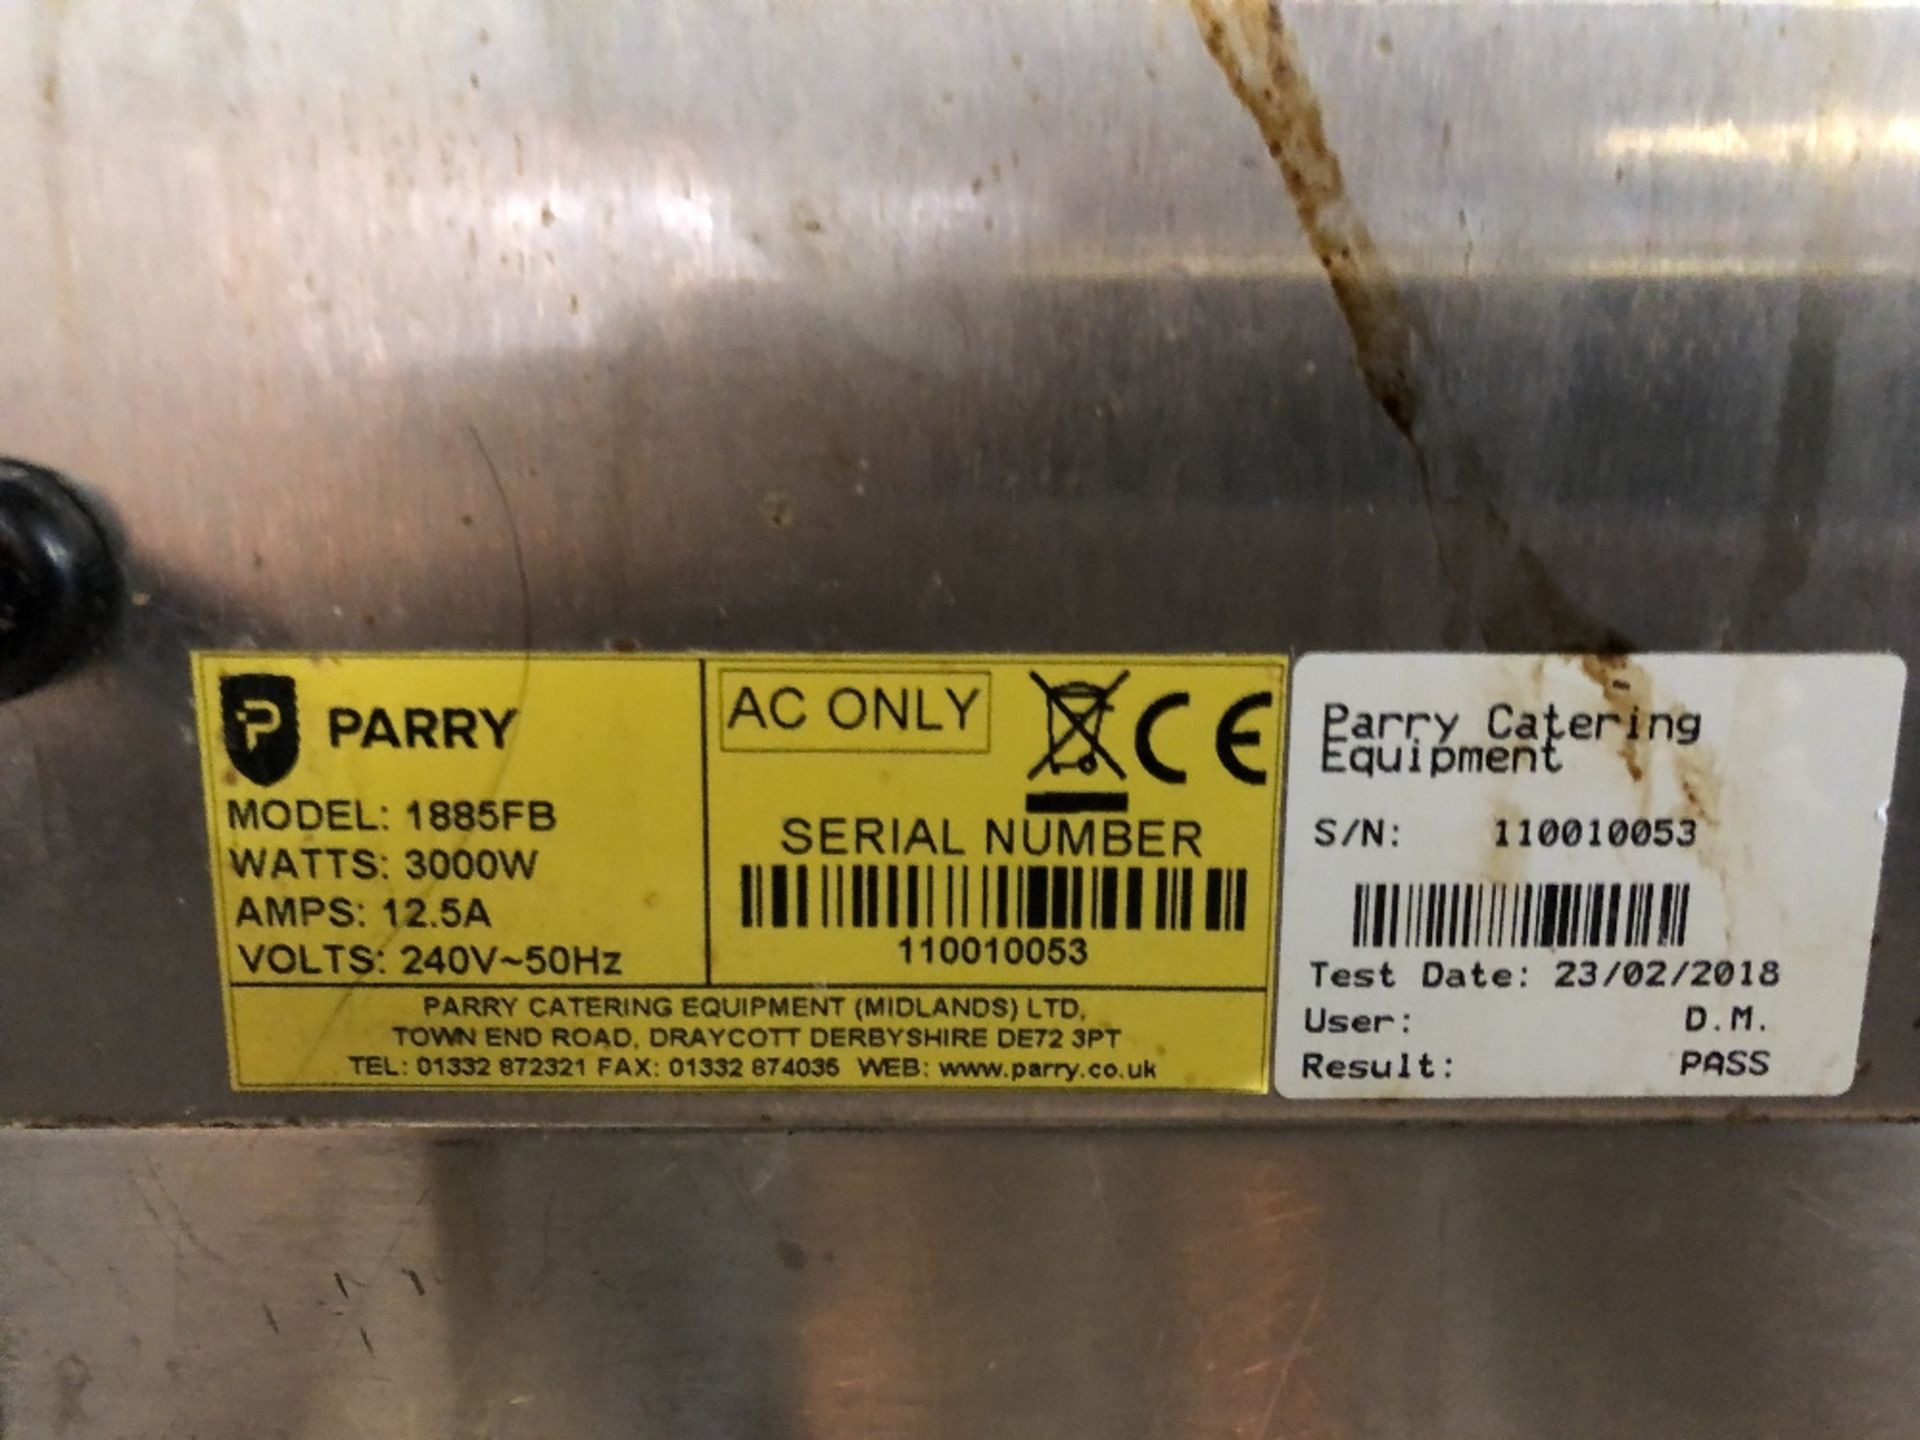 Parry 1885FB Stainless Steel Wet Heat Electric Gastronorm Bain Marie - Image 3 of 3